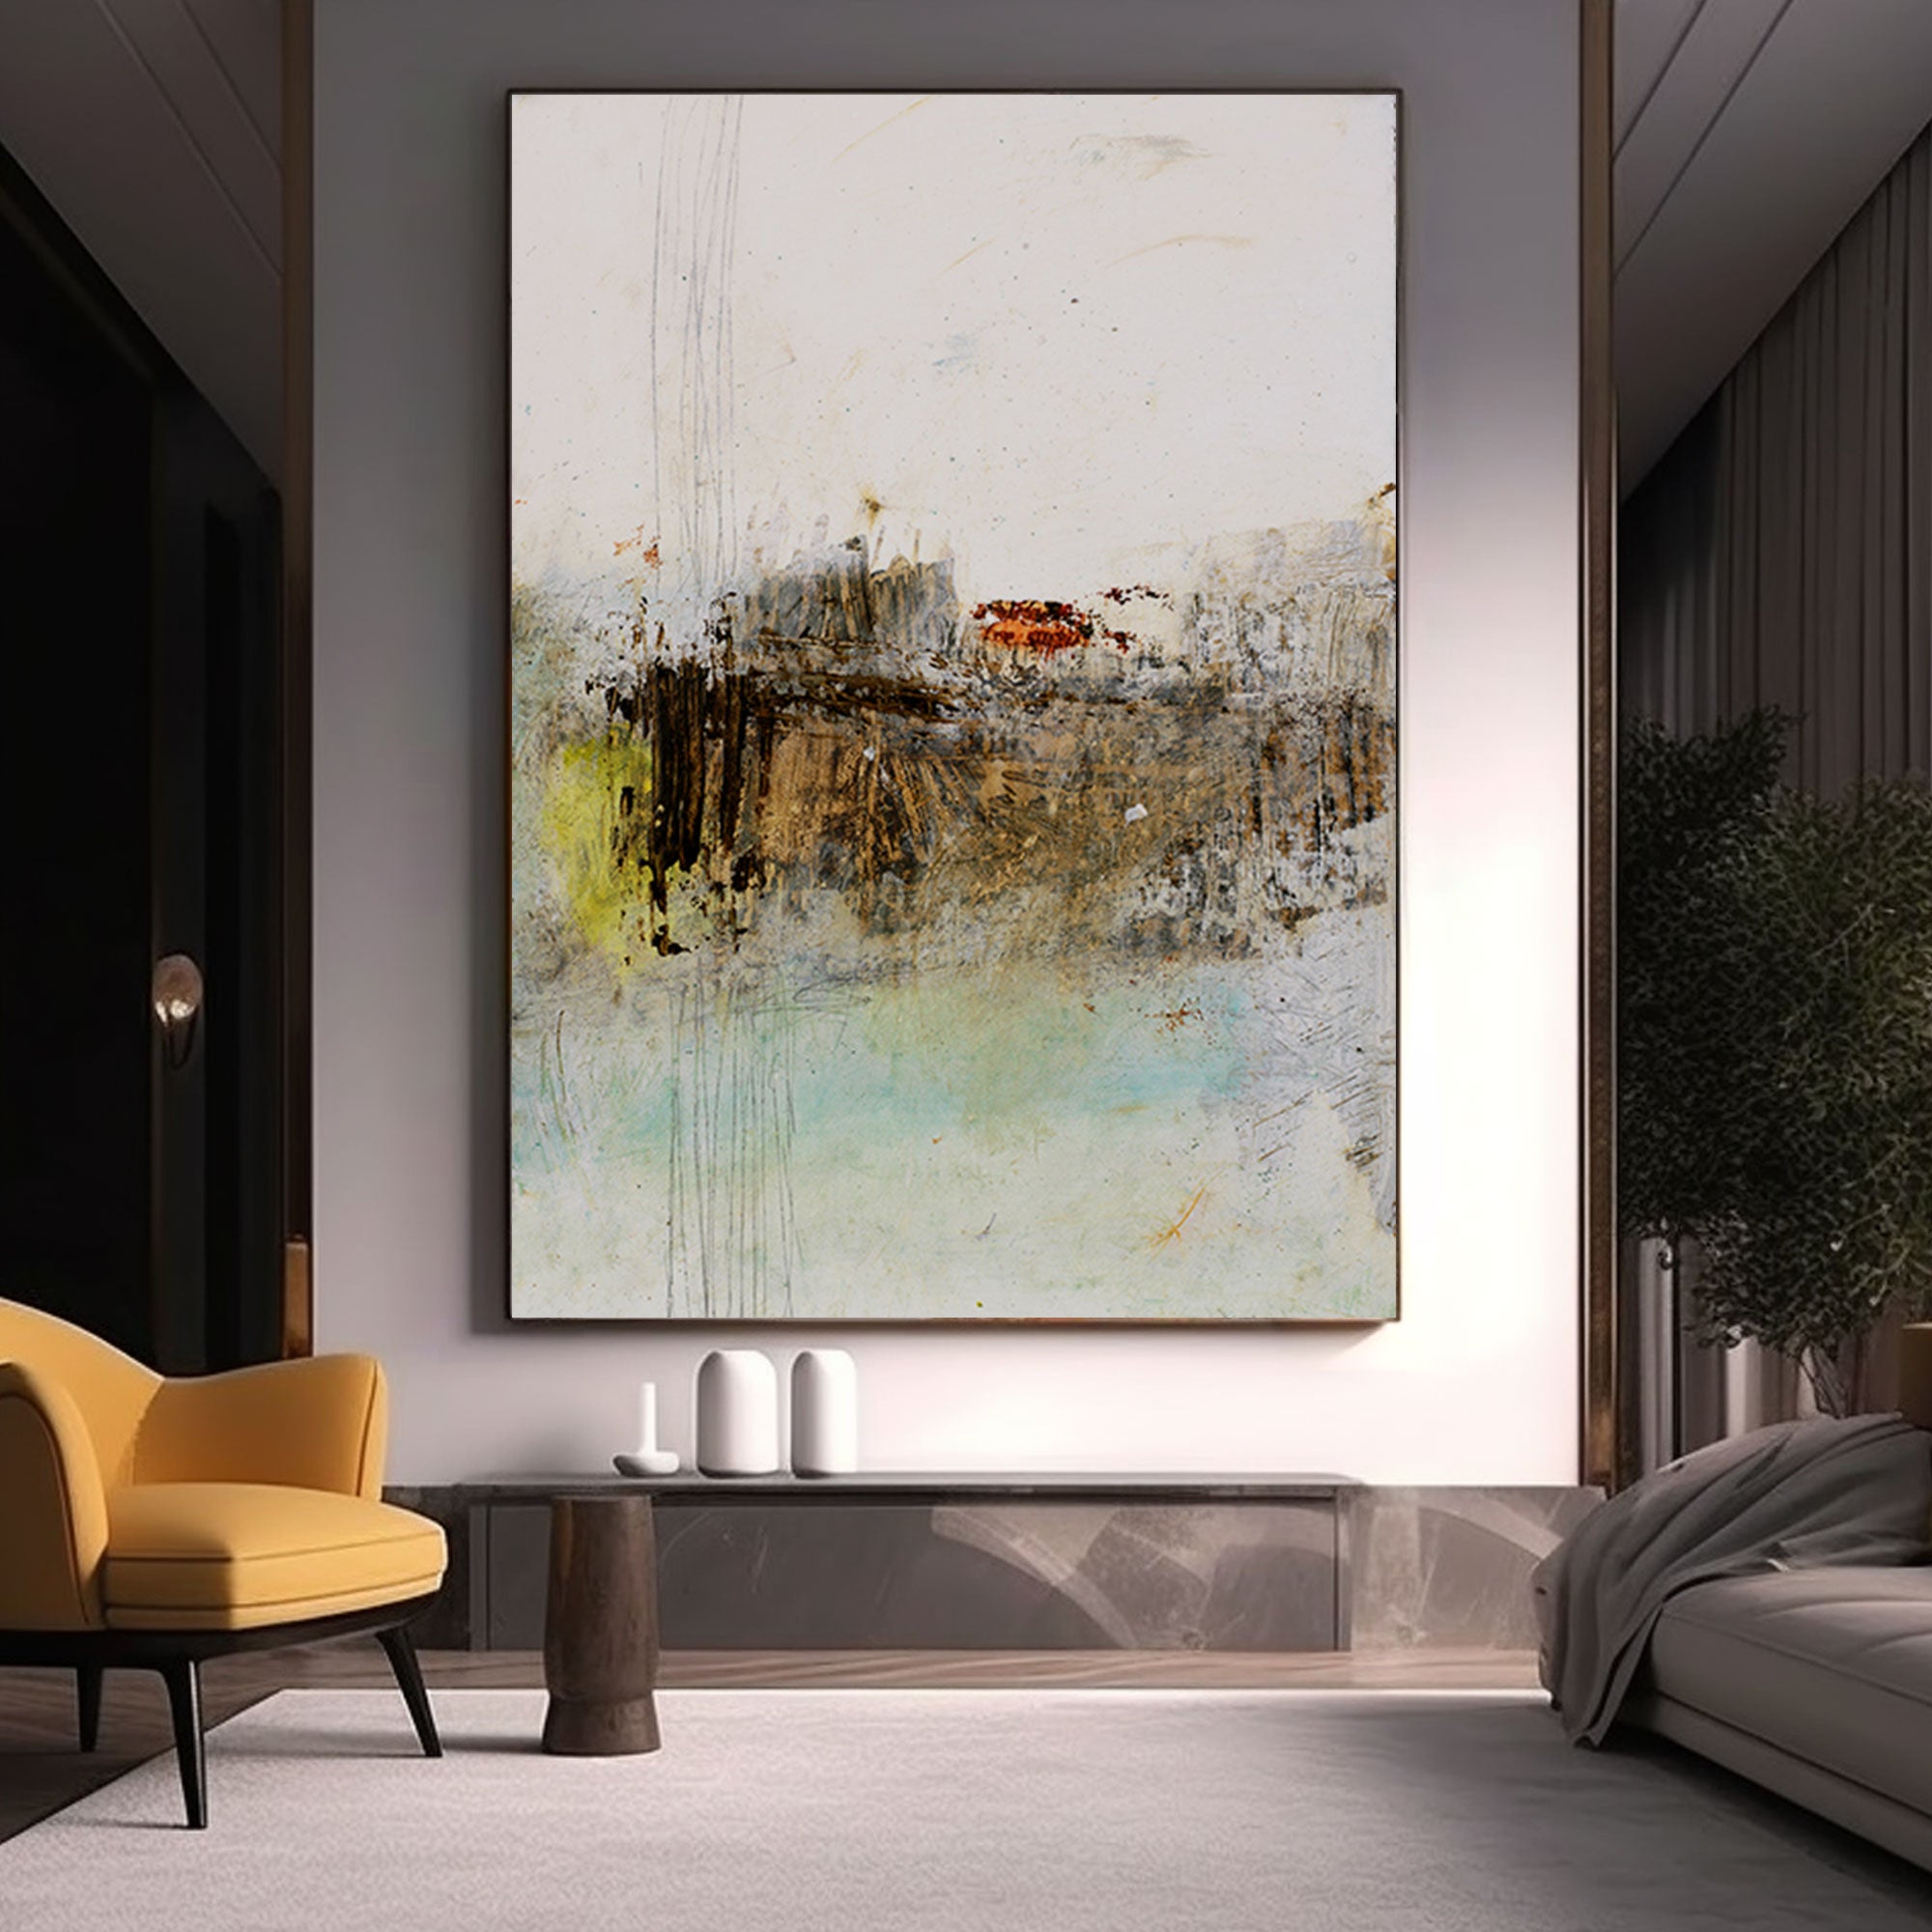 3D Textured Color Painting Of The House "Whispers of Eternity"